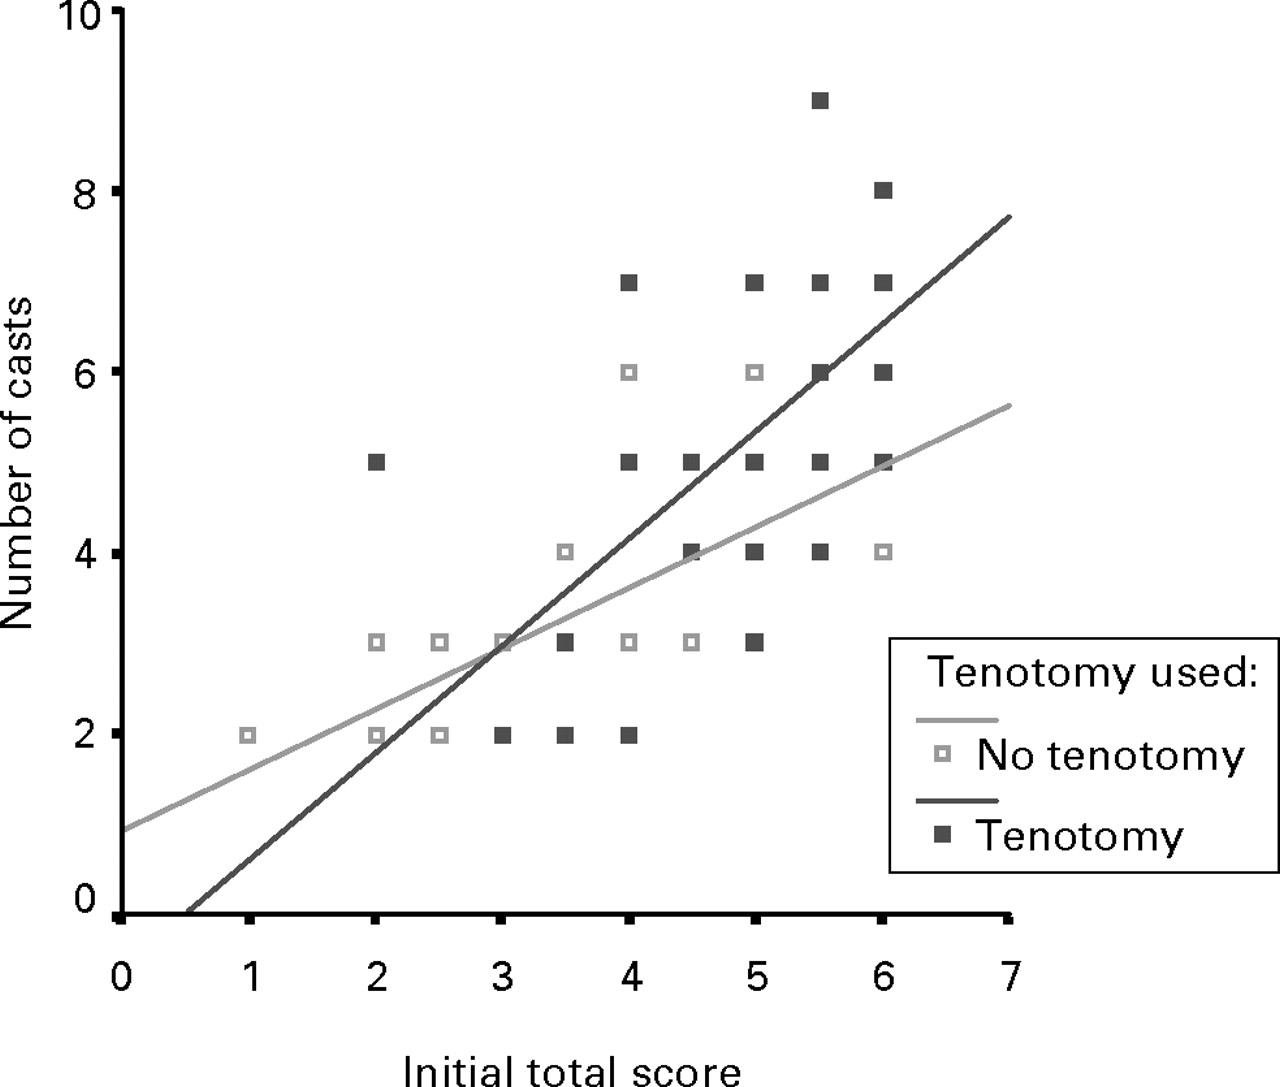 Fig. 1a, Fig. 1b  
            
              Figure 1a – Plot of initial Pirani score against total number of casts. Figure 1b – Plot of initial Pirani scores against total number of casts, separating tenotomy and non-tenotomy groups.
          